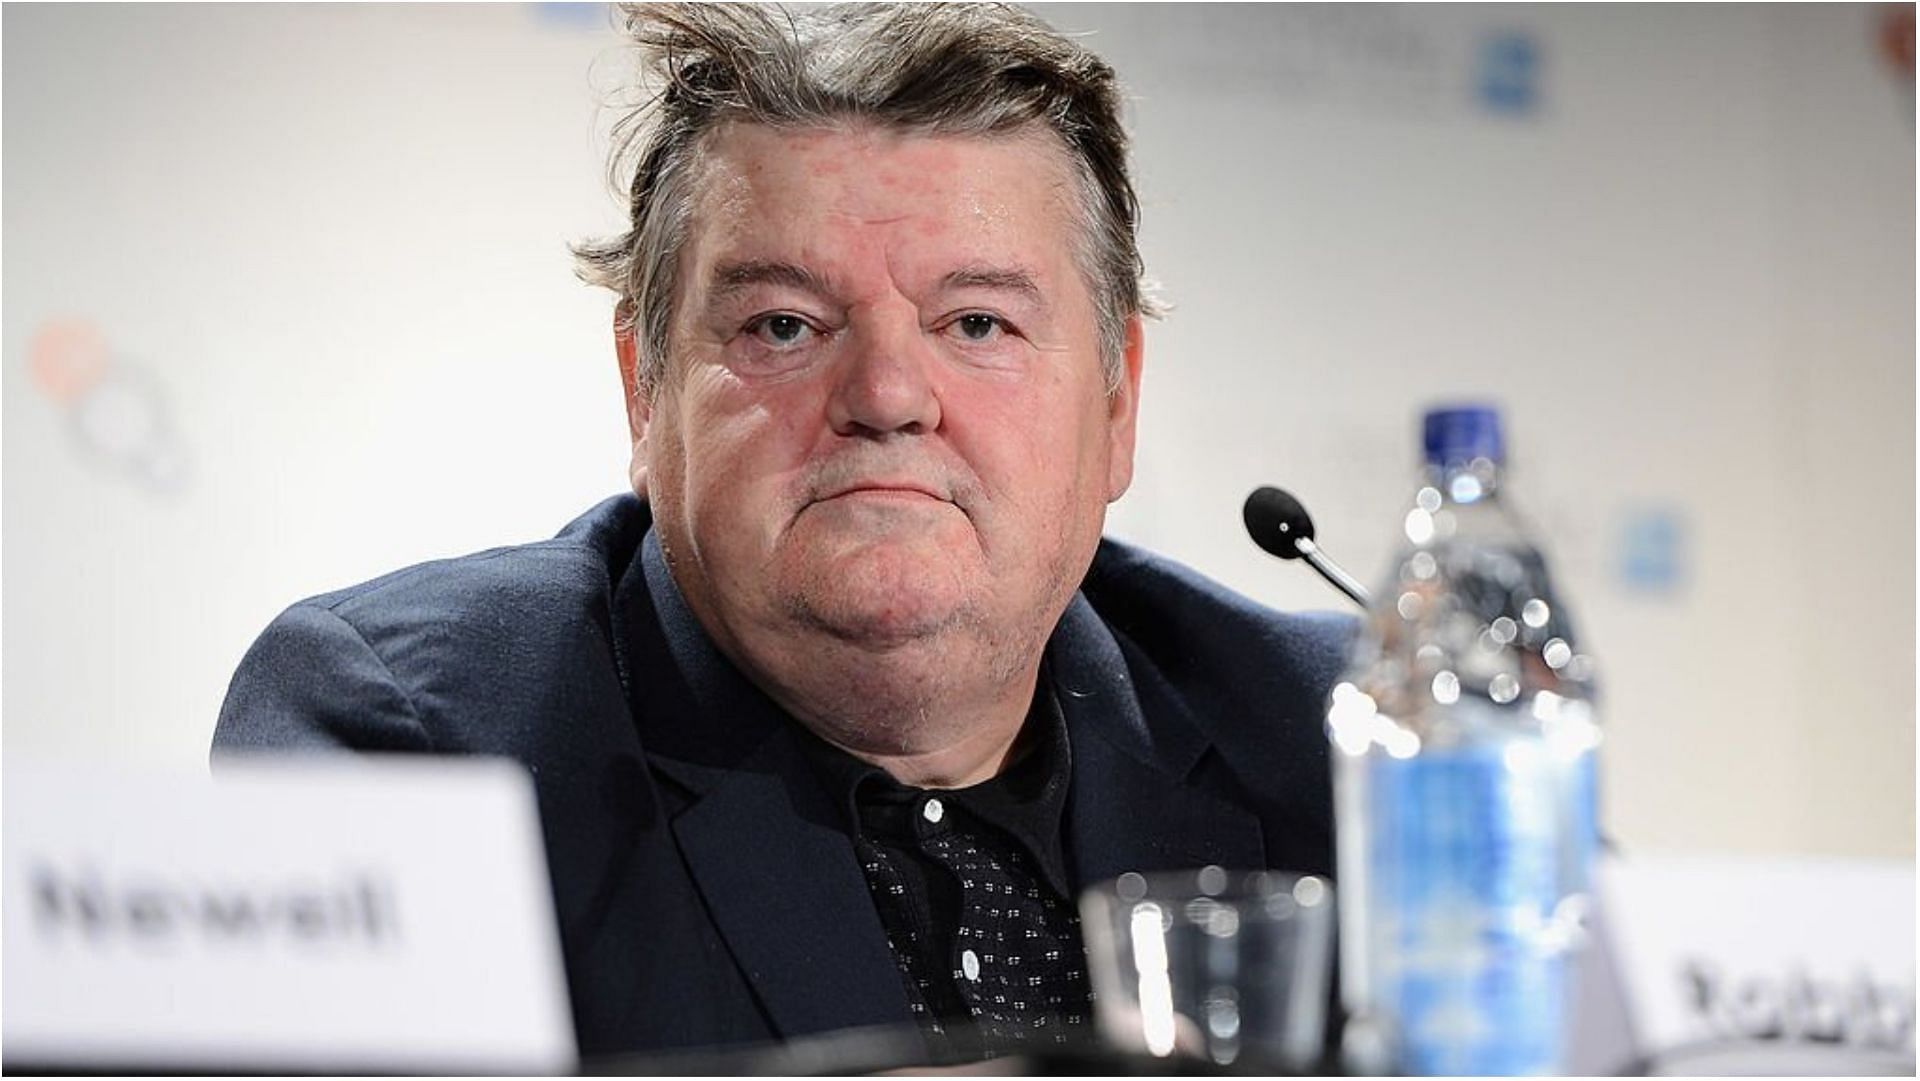 Robbie Coltrane died on October 14 at the age of 72 (Image via Ian Gavan/Getty Images)